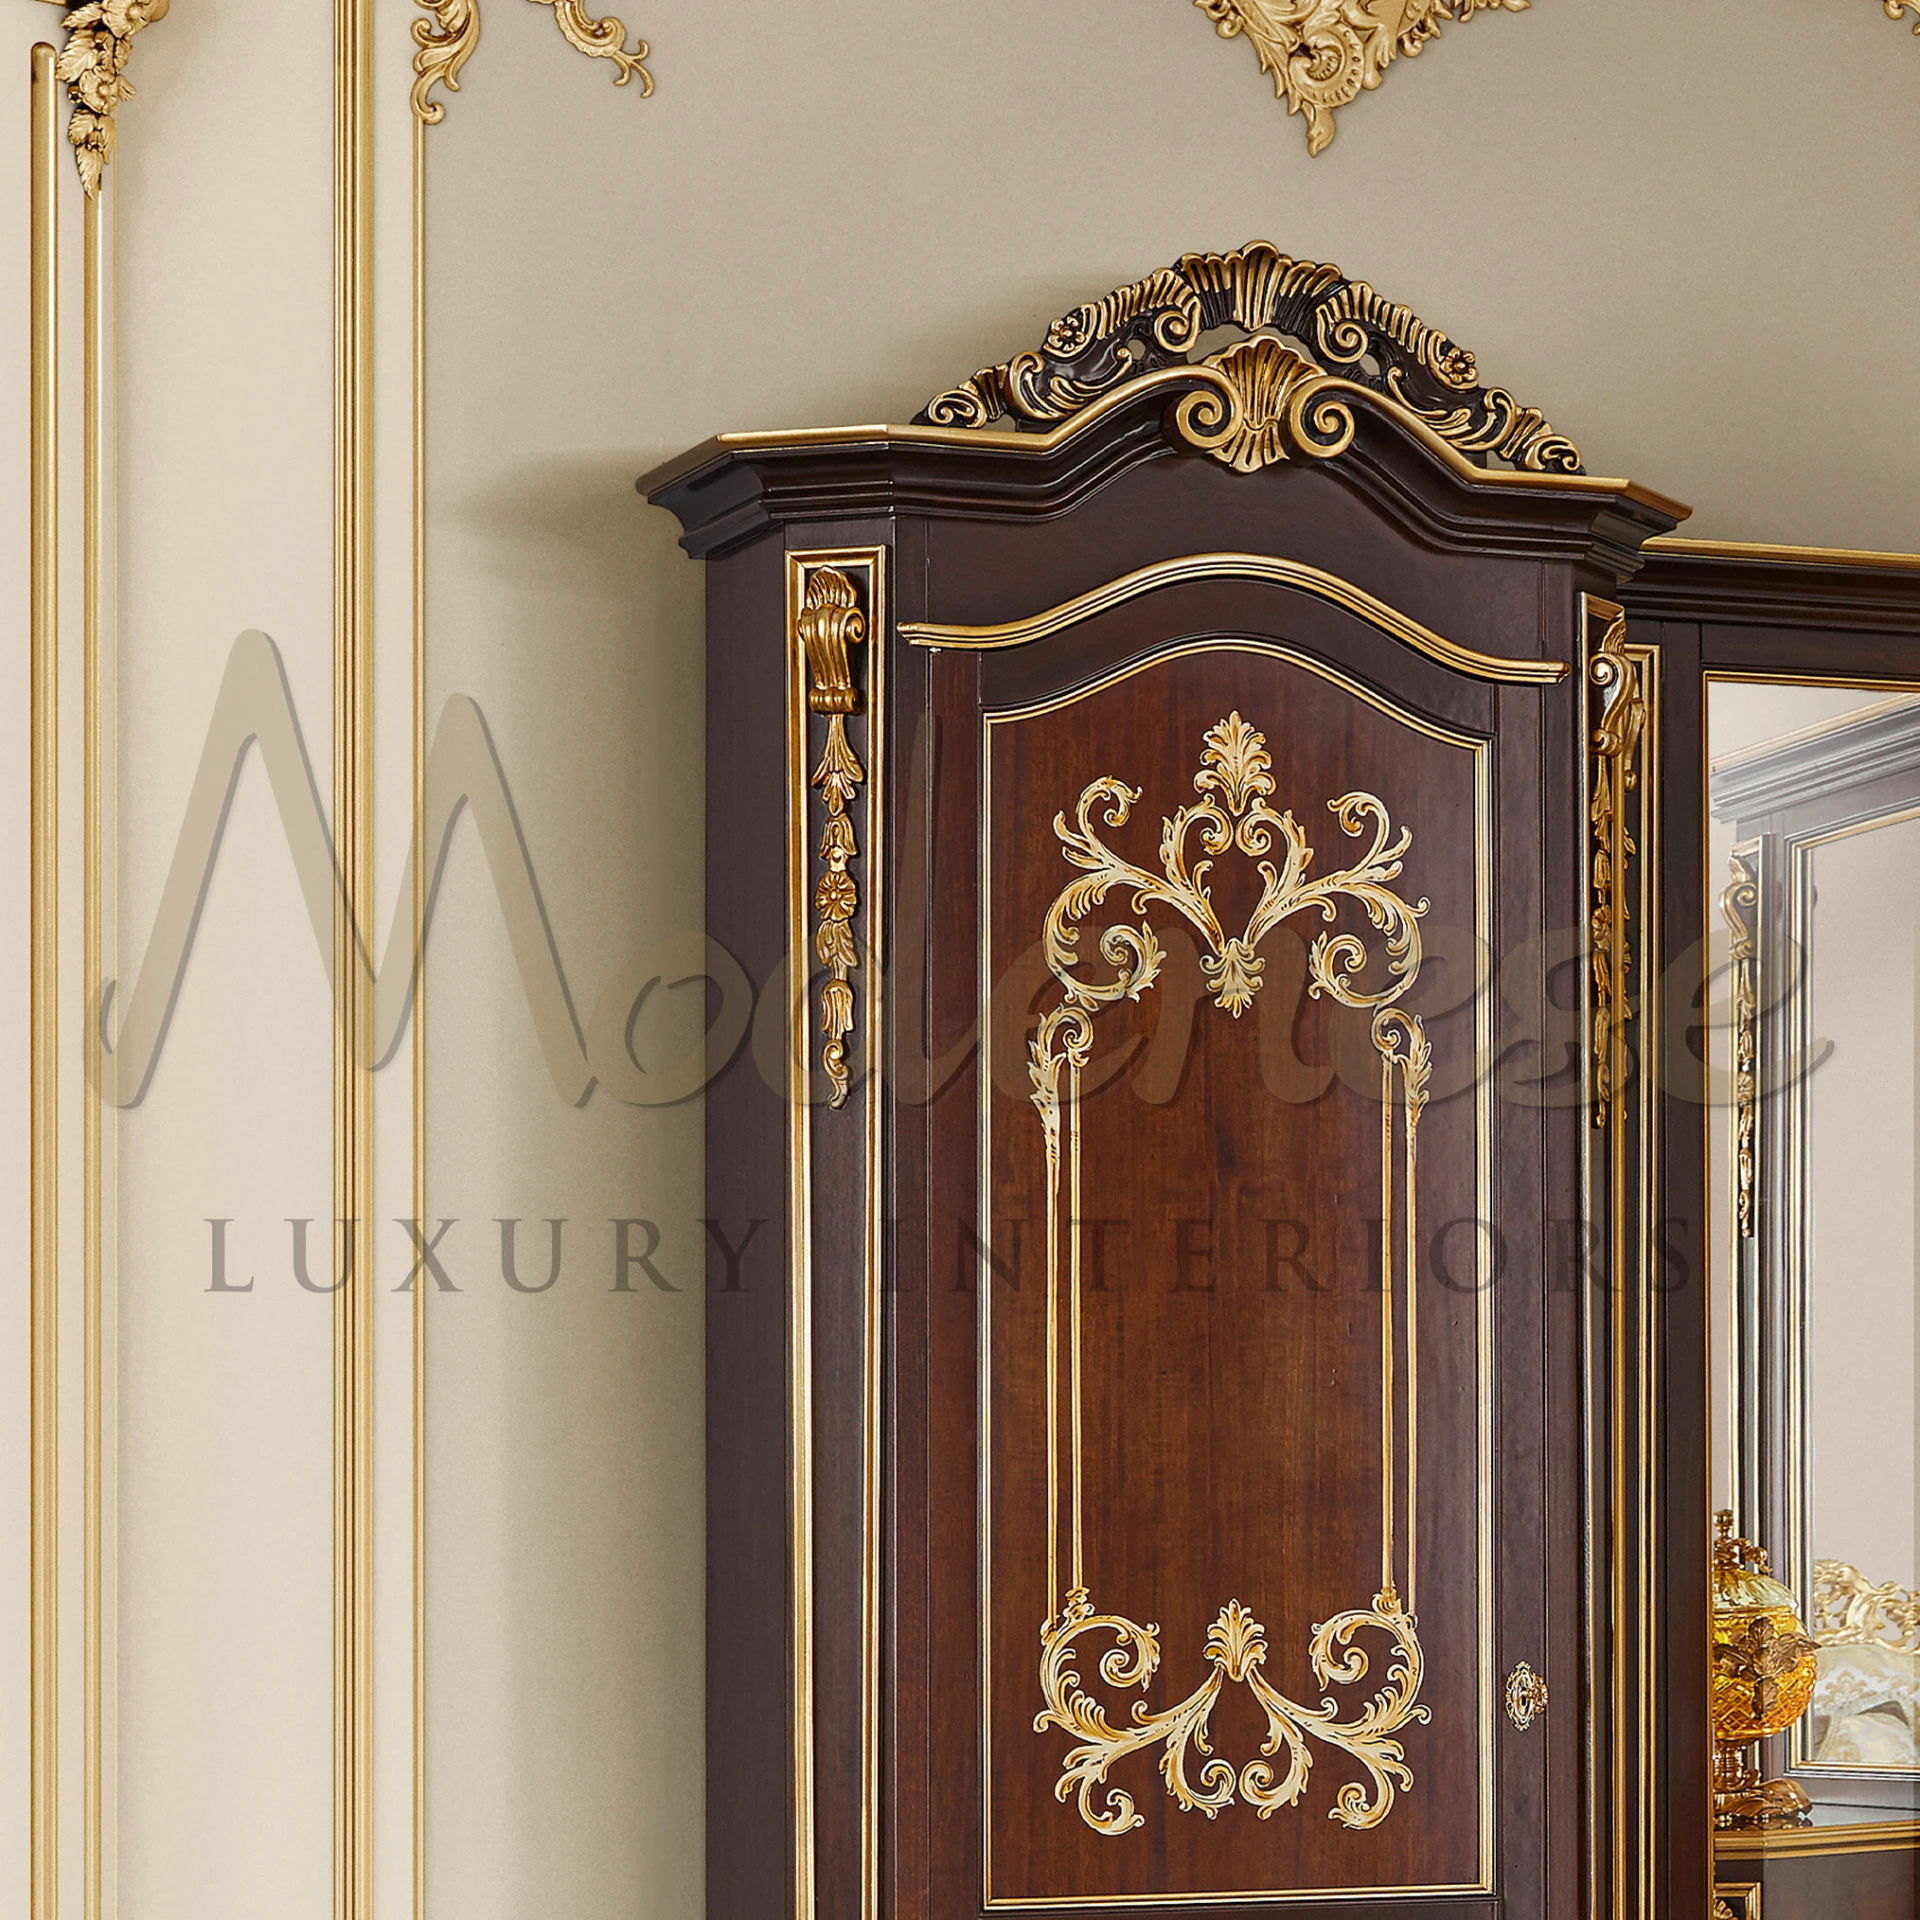 Royal Wooden Entrance Panel decorating a living room TV wall, blending classic design with contemporary home decor.